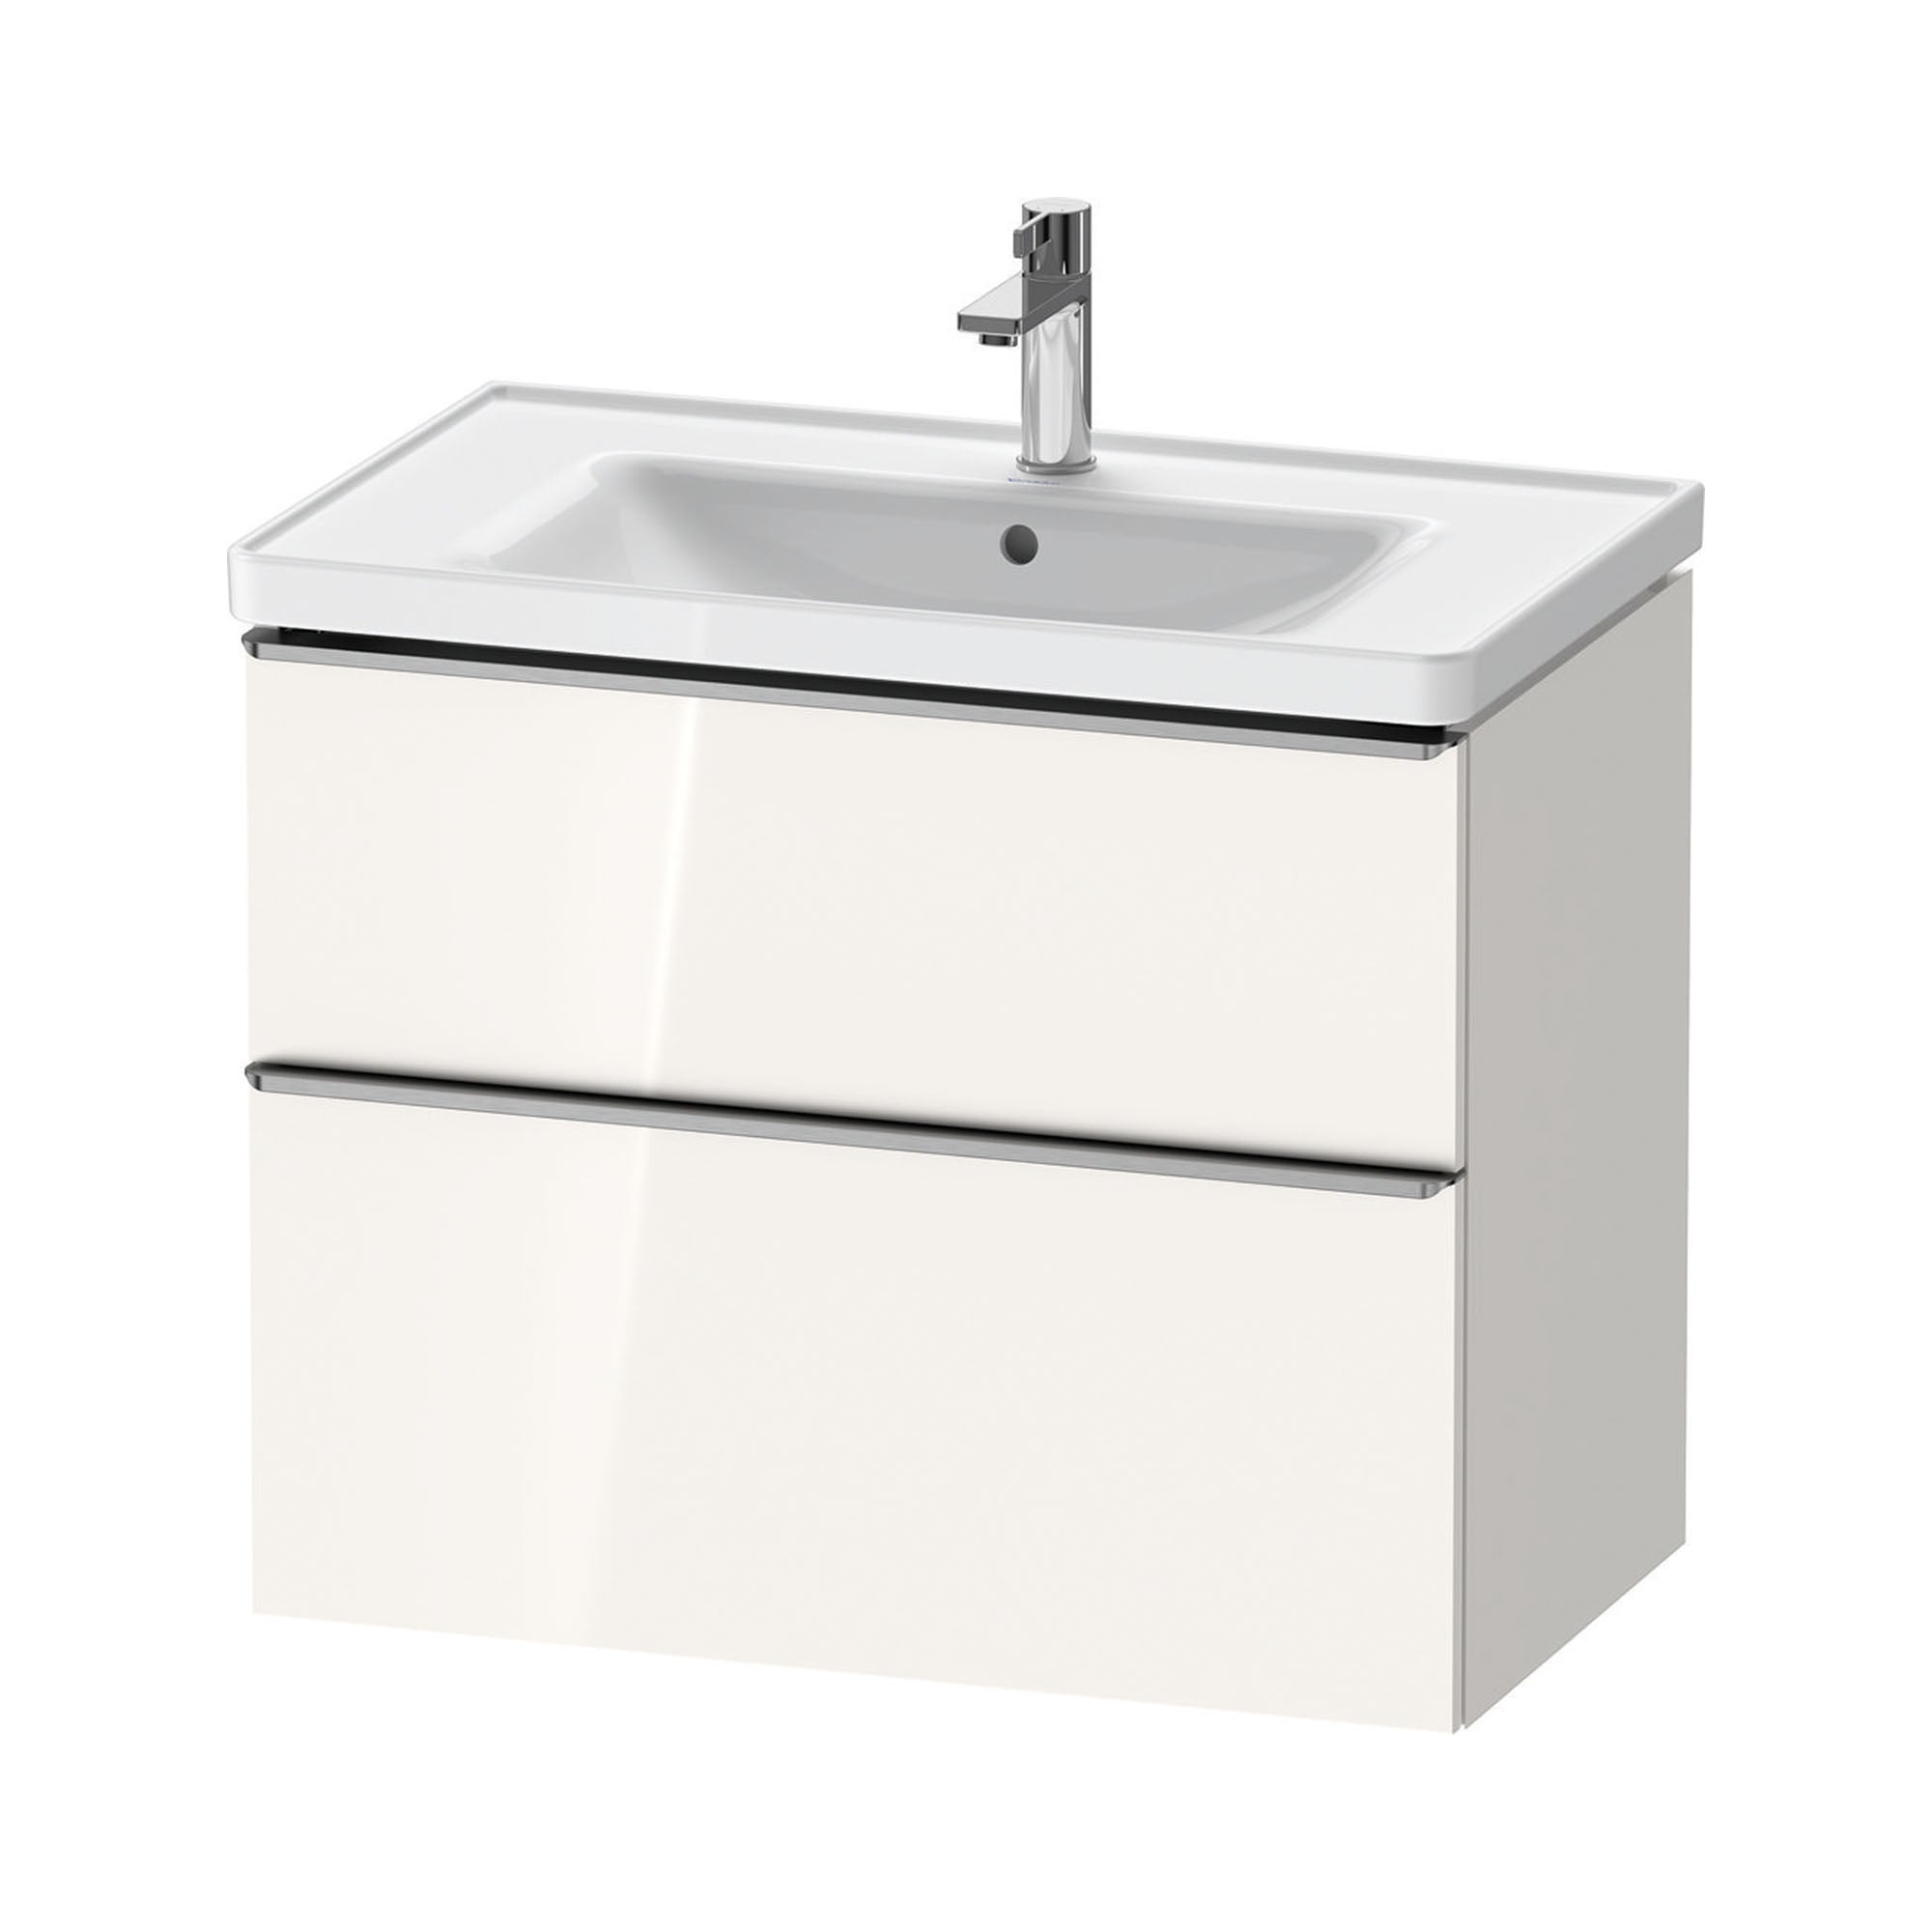 duravit d-neo 800mm wall mounted vanity unit with d-neo basin gloss white stainless steel handles